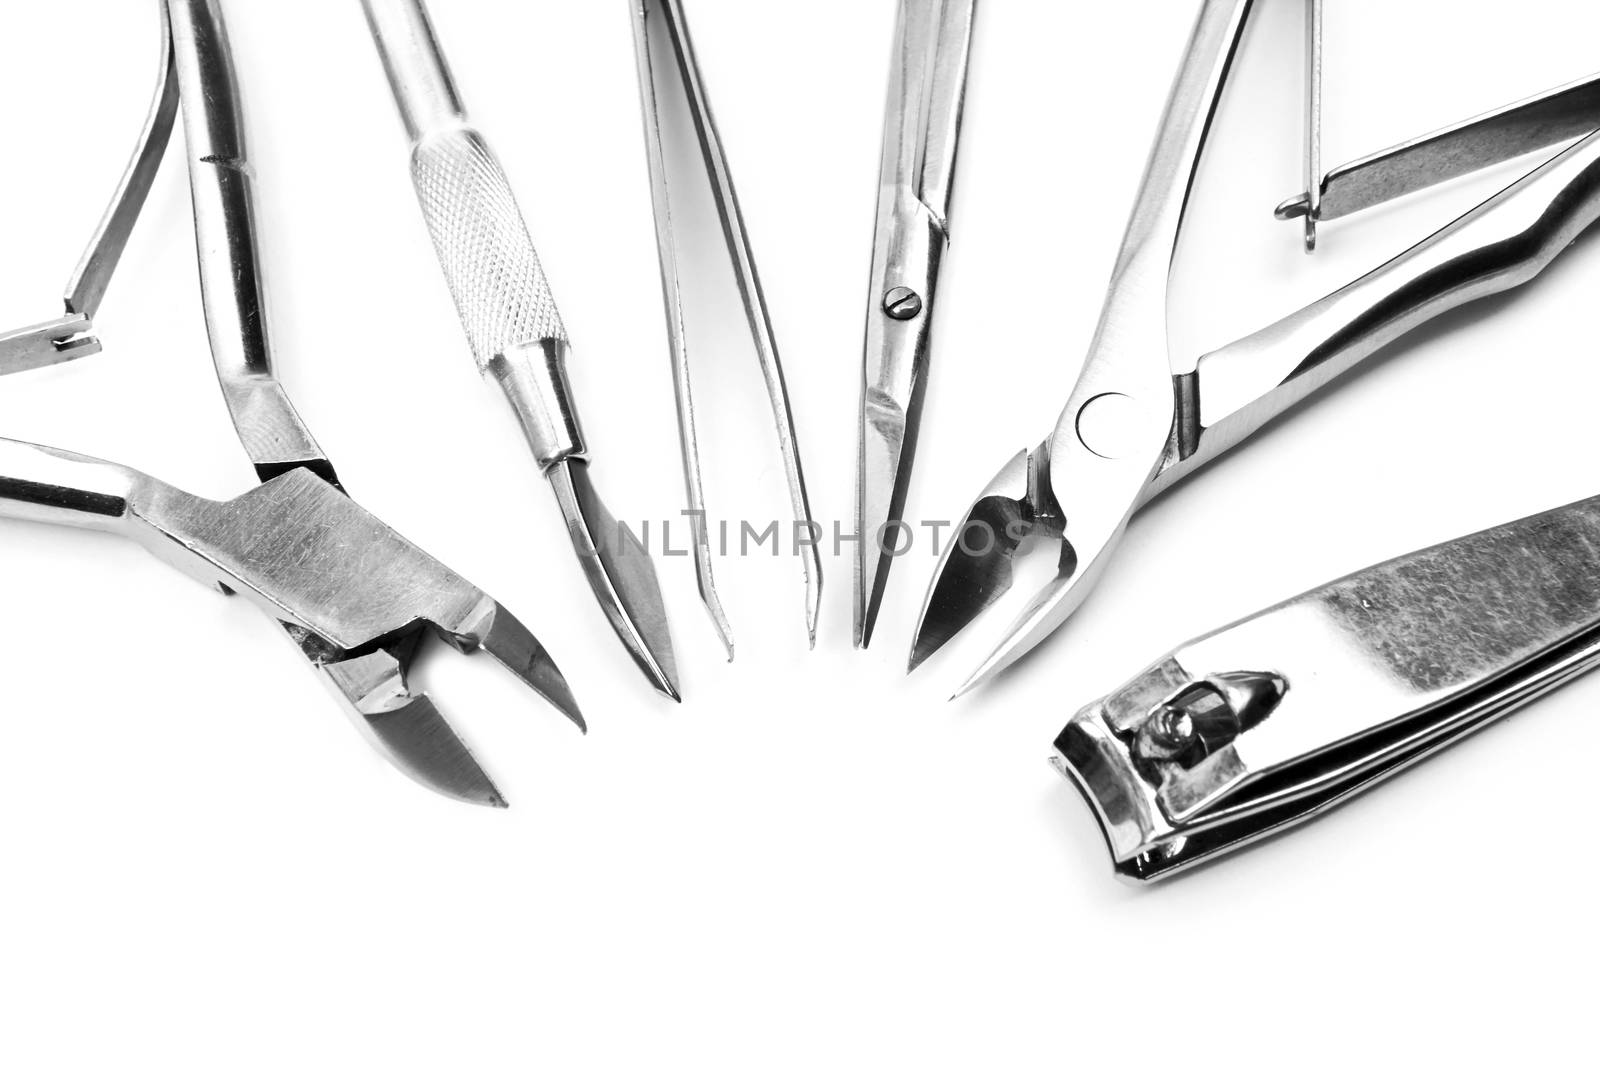 Tools of a manicure set on a white background 